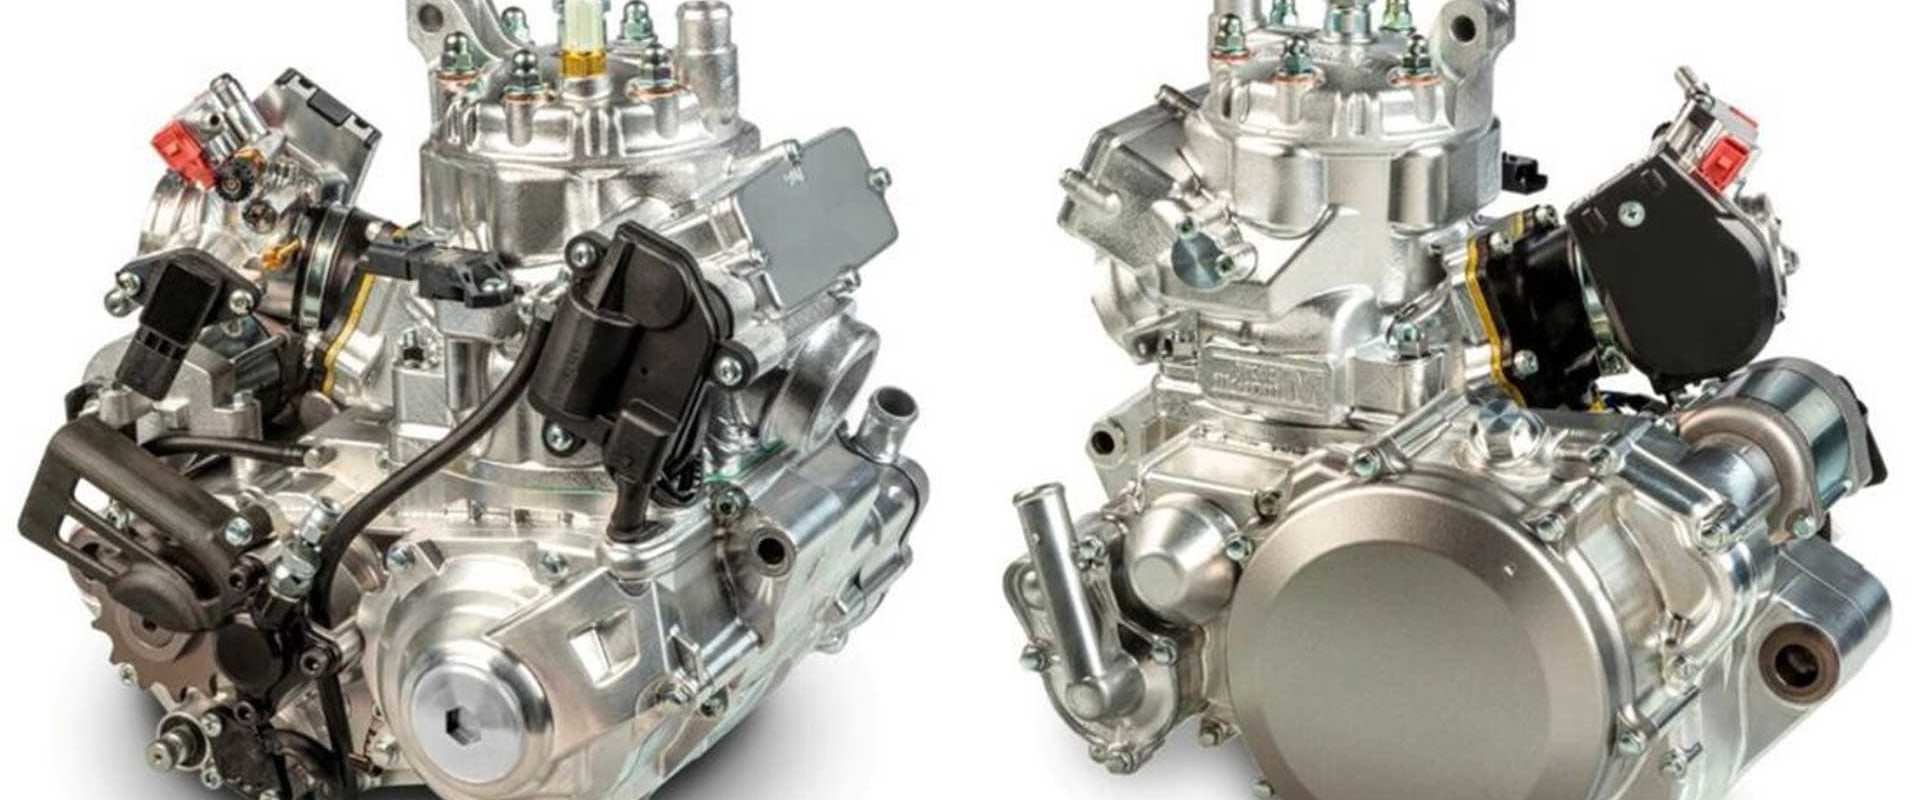 How long will a 2-stroke snowmobile engine last?